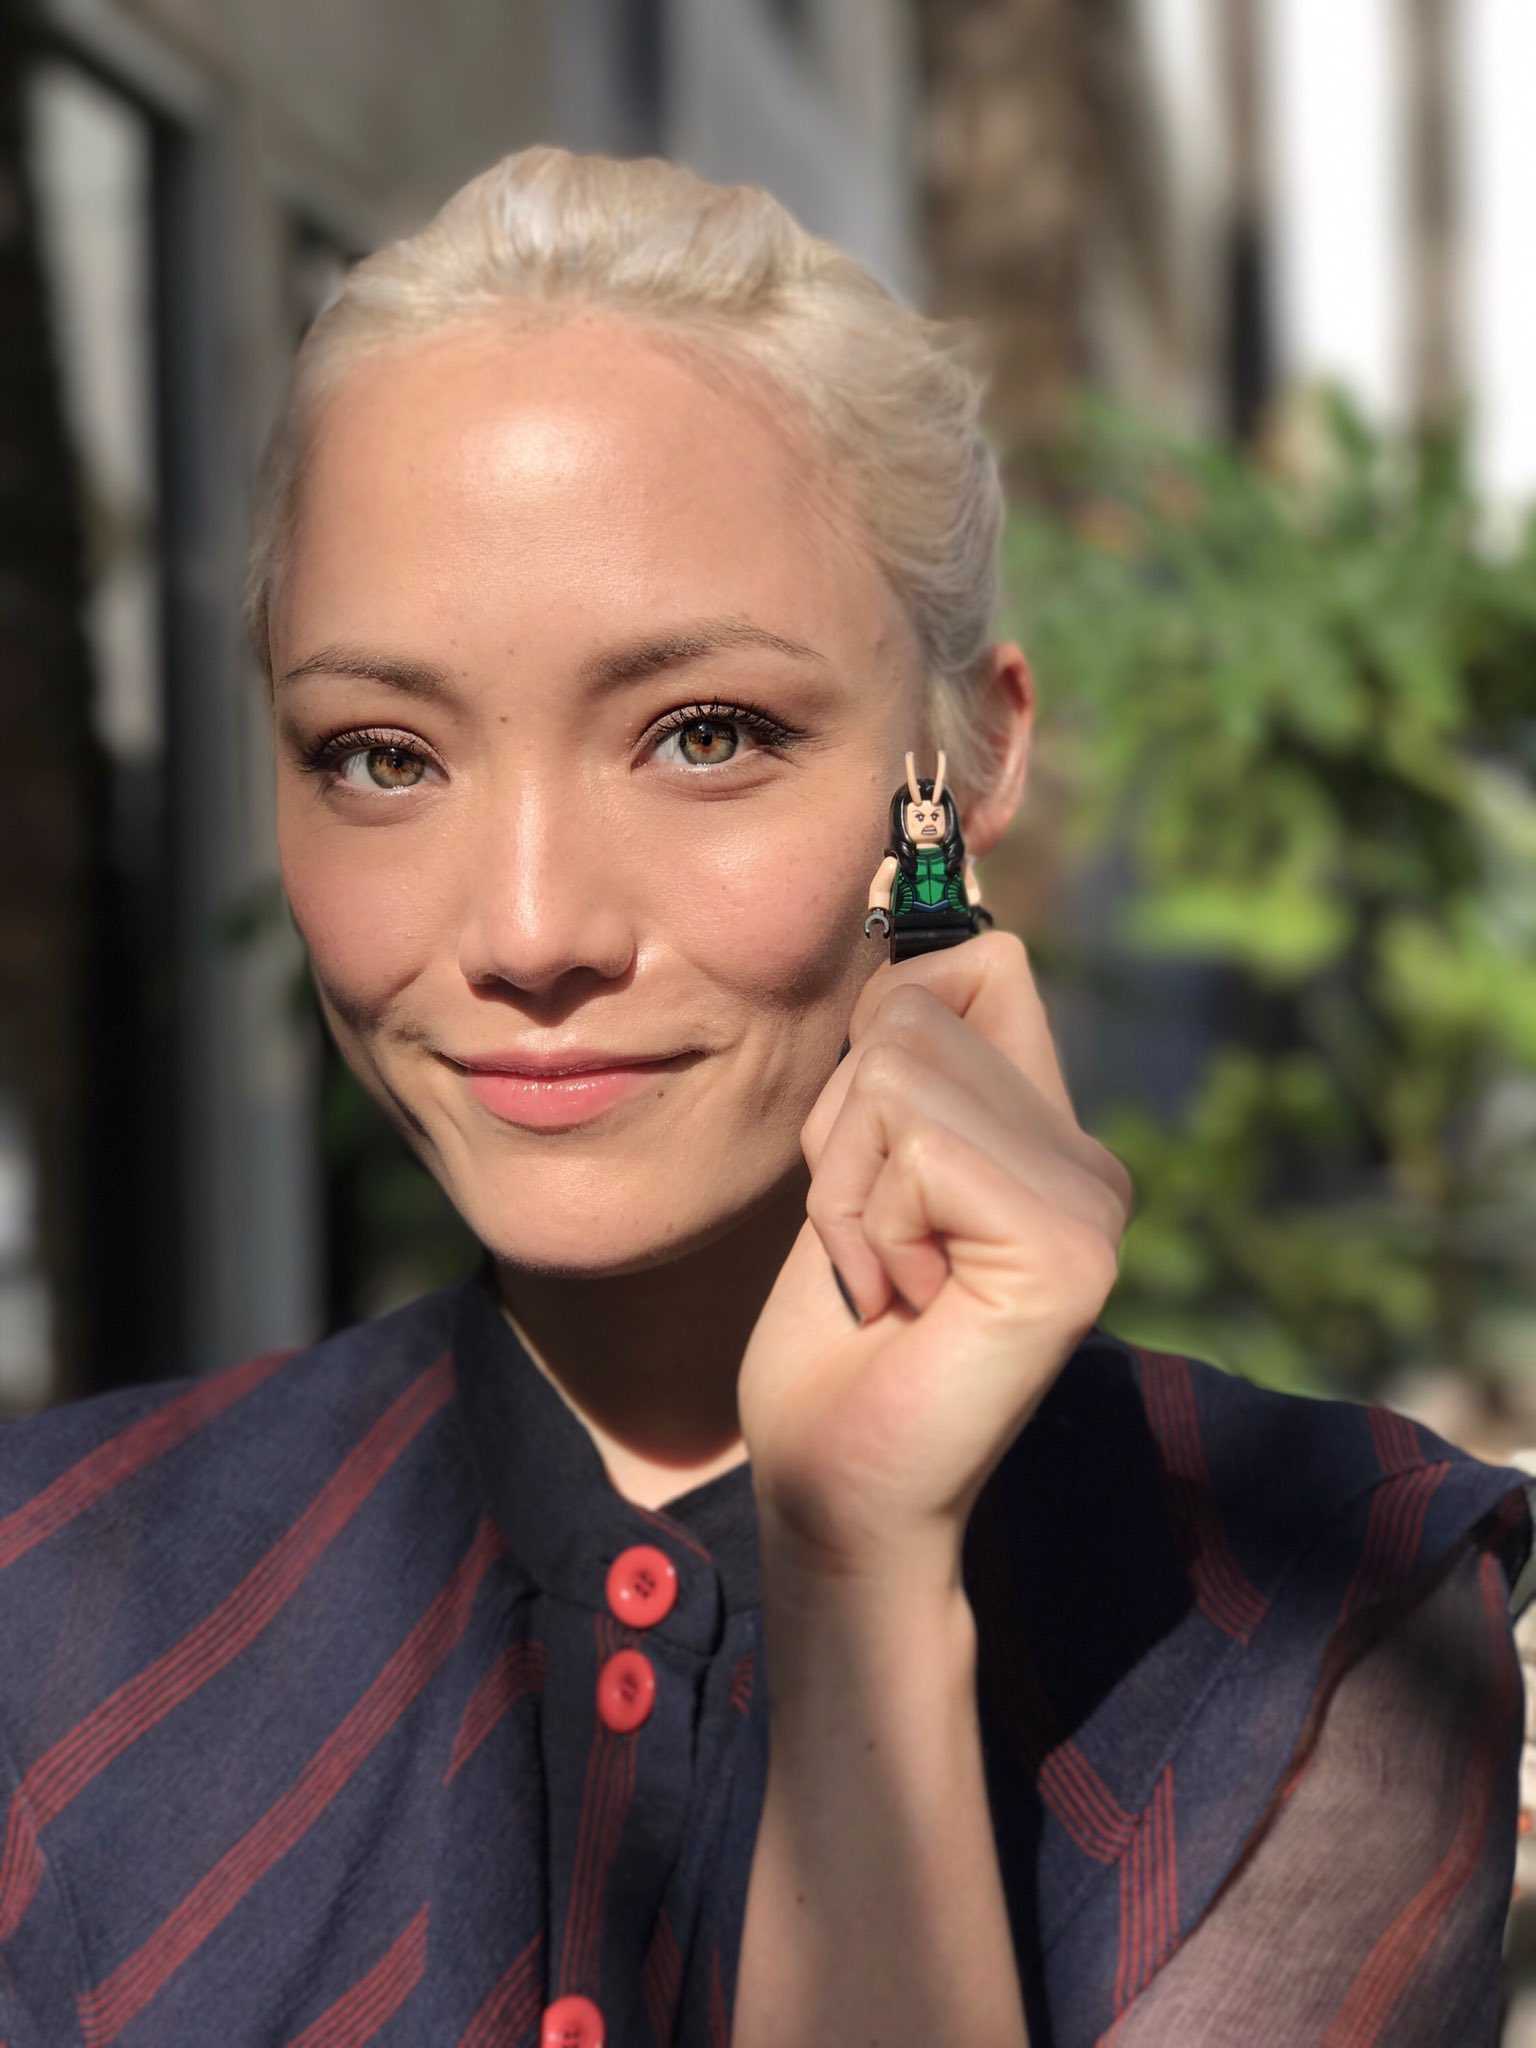 70+ Hot Pictures Of Pom Klementieff Who Plays Mantis In Marvel Cinematic Universe 139